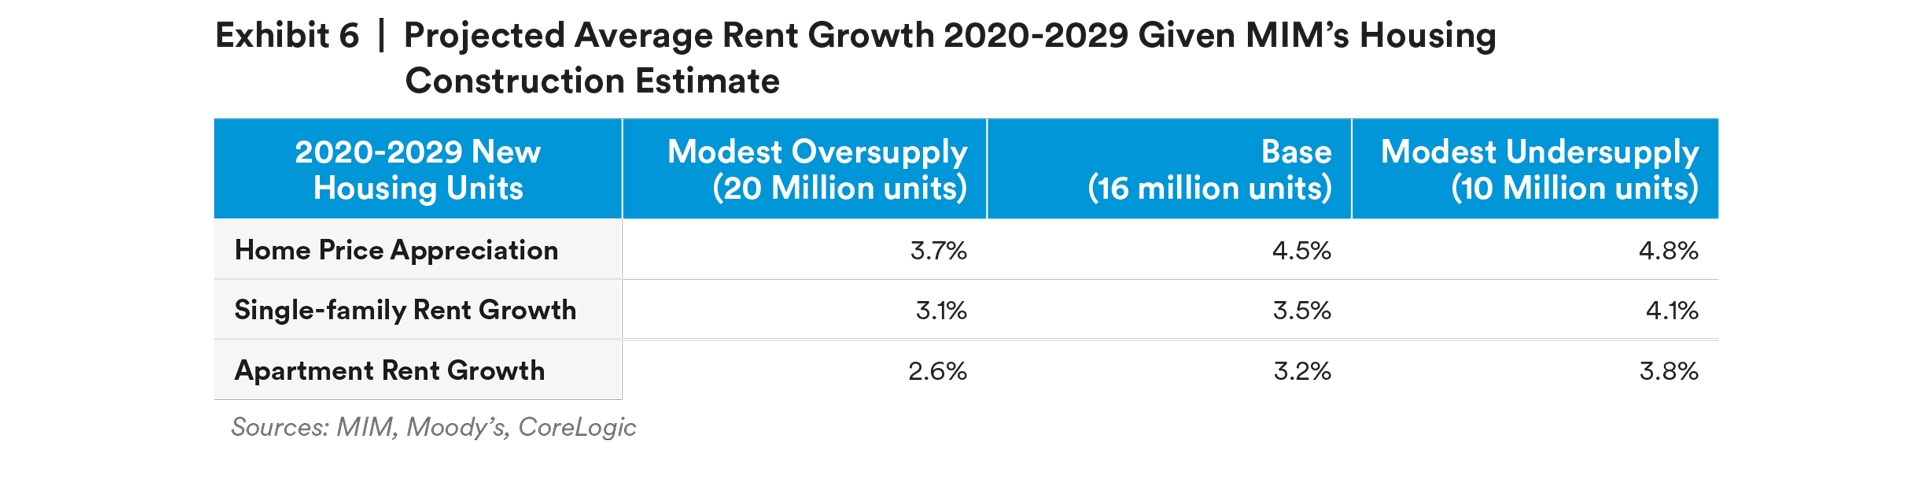 /></figure><!-- /wp:image --><!-- wp:paragraph --><p>We believe there is more risk that housing will be undersupplied this decade, rather than oversupplied. The labor and zoning constraints mentioned may continue to create structural challenges. For example, a decline in immigration and an increase in college education rates have both subtracted from the availability of construction labor. Additionally, the recently passed $1 trillion infrastructure package may further crowd out construction labor later this decade.</p><!-- /wp:paragraph --><!-- wp:paragraph --><p><strong>Diversification Within the Single-family Rental Sector</strong></p><!-- /wp:paragraph --><!-- wp:paragraph --><p>While SFR offers investors an additional source of portfolio diversification relative to apartments or the broader commercial real estate asset class, there are a variety of investment options within the SFR sector that are worth outlining.</p><!-- /wp:paragraph --><!-- wp:paragraph --><p>“Scattered home” strategies typically involve acquiring many disparate existing single family homes across a variety of metropolitan areas. This was one of the earliest and most common forms of institutional investment in the single family rental sector.</p><!-- /wp:paragraph --><!-- wp:paragraph --><p>“Purpose-built” strategies involve investing in contiguous communities of single family homes that are built for rent. Home sites in purpose-built communities may be attached / higher density, and may closely resemble 1-story garden apartments. They may also be detached, low-density sites. The purpose-built category is in its very early days, but we estimate these communities may operate with lower operating expense and capital expenditure ratios and may trade at a yields below scattered home investments.</p><!-- /wp:paragraph --><!-- wp:paragraph --><p>We believe both classes of single family rentals offer attractive investment opportunities today. The need for new housing stock provides an opportunity for developers of purpose-built product, while existing scattered home stock, though older, may in some cases offer more “infill” locations closer to employment centers and transportation links.</p><!-- /wp:paragraph --><!-- wp:paragraph --><p><strong>Risks to the Outlook</strong></p><!-- /wp:paragraph --><!-- wp:paragraph --><p>We believe the most apparent upside risks for the single family rental sector include an even faster institutionalization that drives cap and discount rates down more quickly than we are expecting, an increase in “NIMBYism” that causes more severe supply shortages, and an uptick in “work from home” that incentivizes households to prioritize living in a larger dwelling.</p><!-- /wp:paragraph --><!-- wp:paragraph --><p>The most apparent downside risks may include a misunderstanding of the reasons single family home prices have appreciated so much since the start of the pandemic, a more significant downsizing effect from the baby boomer generation (such as individuals moving into retirement facilities at a faster pace) which greatly increases the supply of housing on the market, and a full reversal in work-from-home trends that causes many recent home buyers to downsize to smaller apartments. Additionally, the for-sale housing market has been a politically sensitive topic for over a century, and legislative changes that can impact investor returns are difficult to predict. Increasing legislation in the single family rental space could slow the pace of institutionalization, and could potentially disrupt the balance between supply and demand.</p><!-- /wp:paragraph --><!-- wp:image --><figure class=